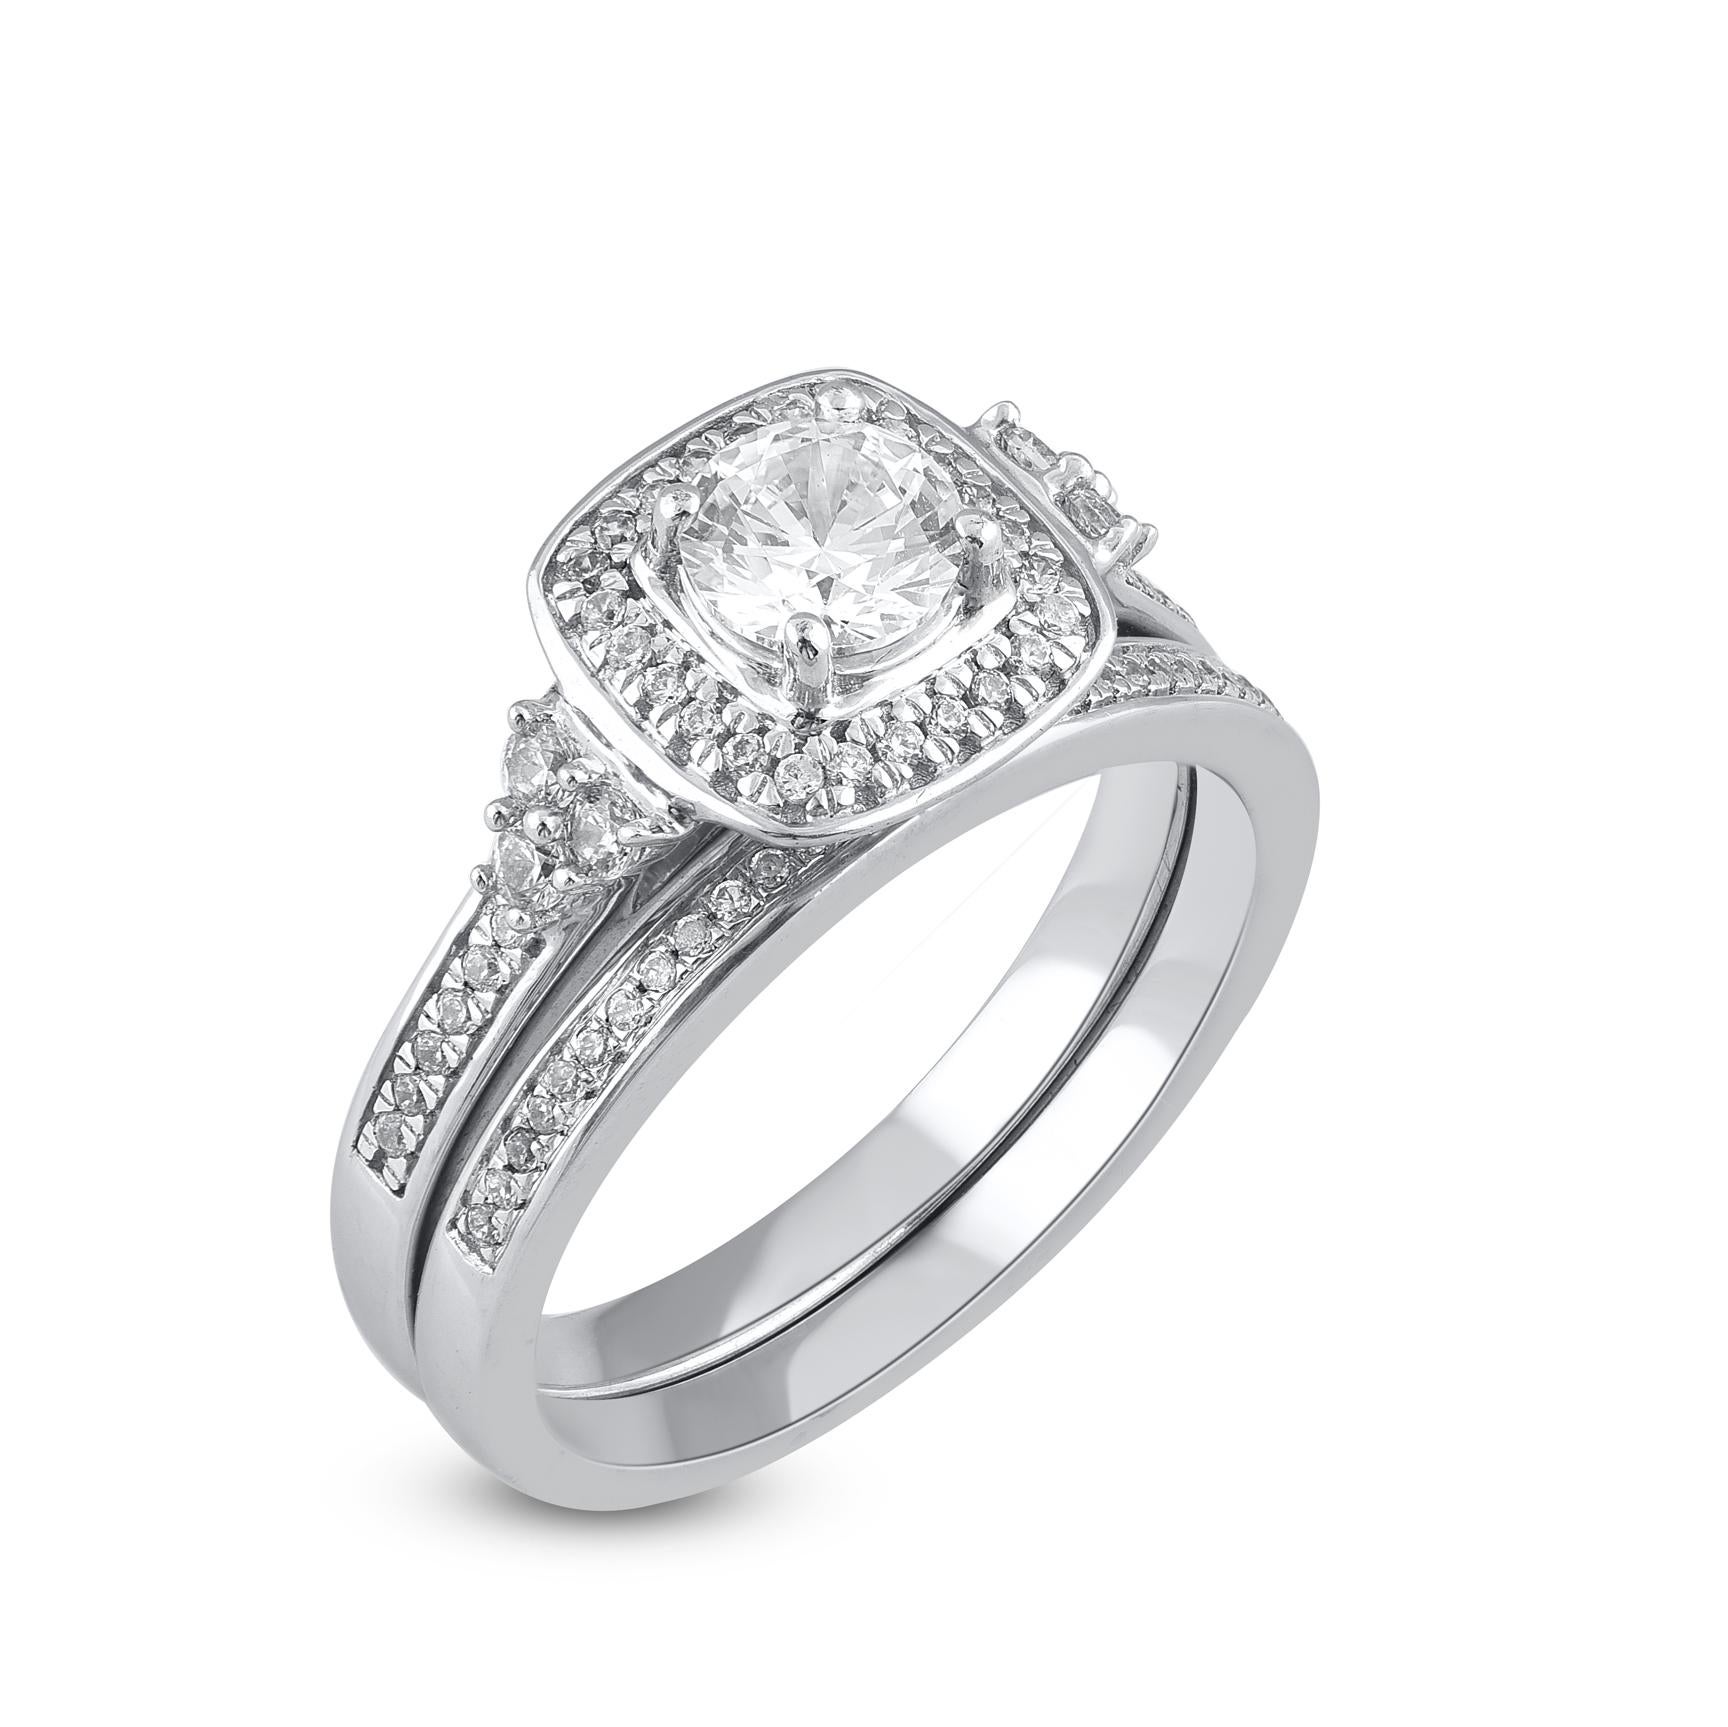 Make lifelong memories with this diamond cushion-frame bridal set. Crafted in 14 Karat white gold. This wedding ring features a sparkling 72 single cut and brilliant cut round diamonds beautifully set in pave & prong setting. The total diamond